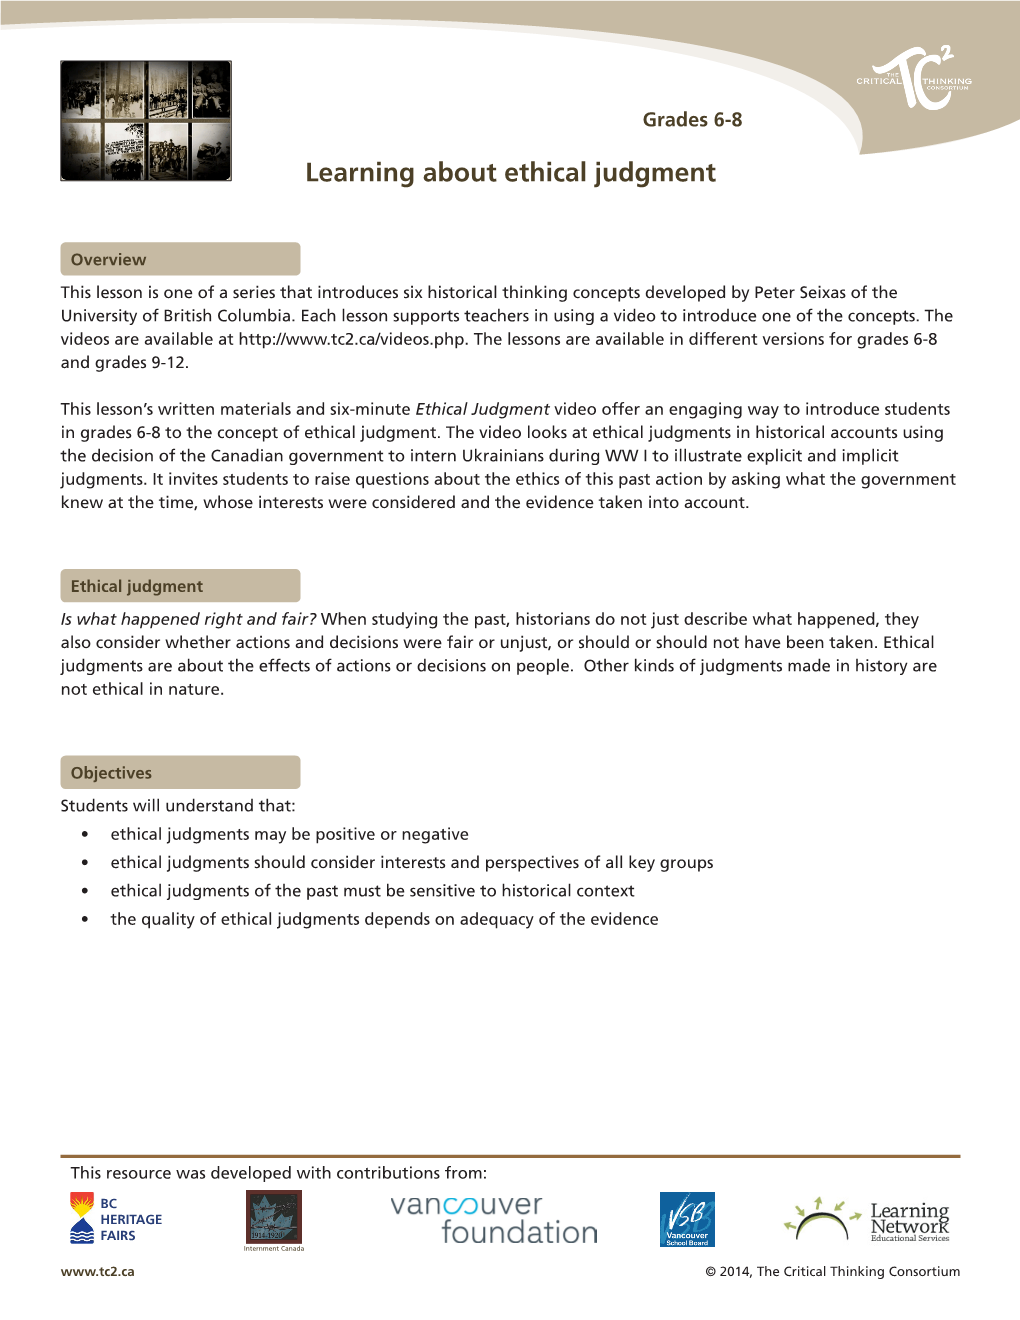 Learning About Ethical Judgment